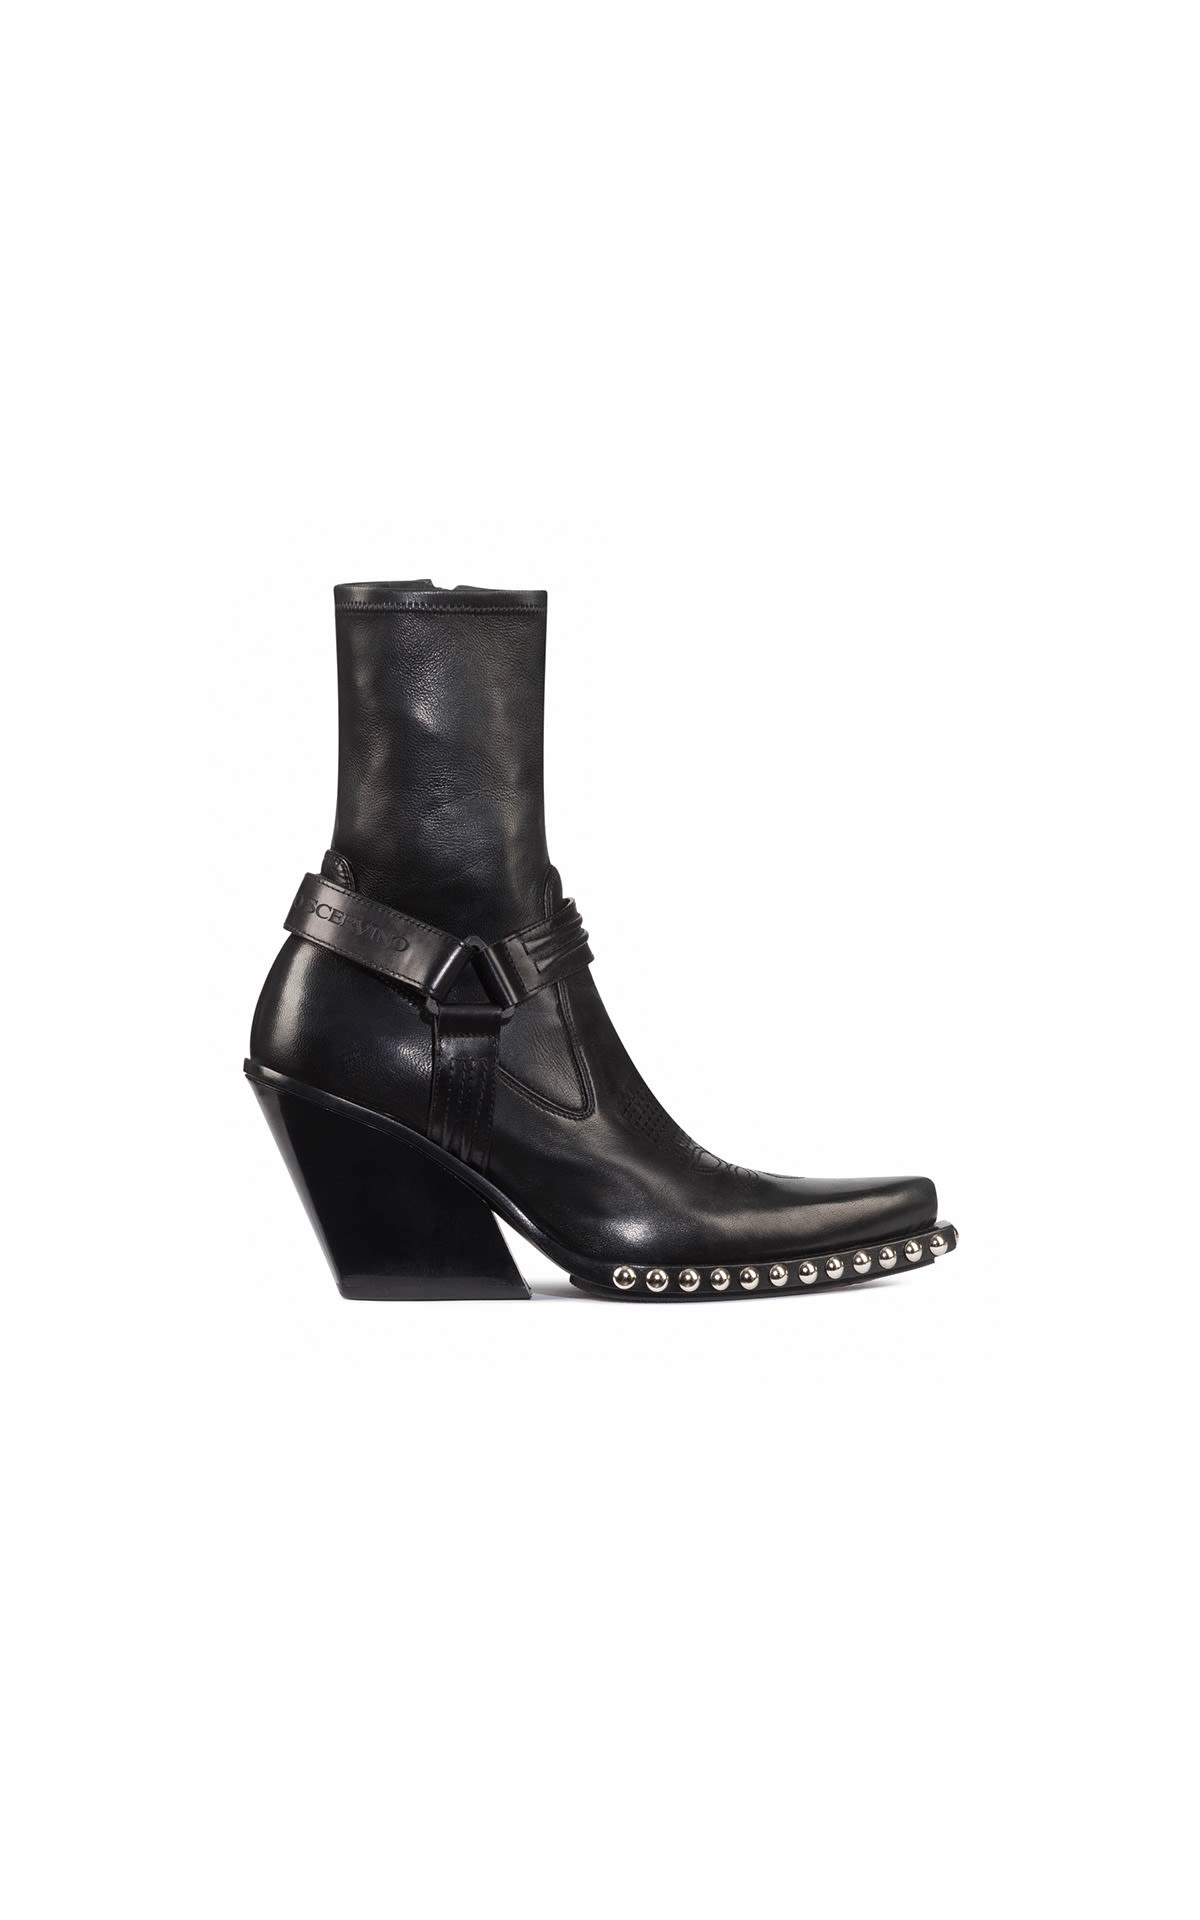 Ermanno Scervino Texan ankle boots in black leather